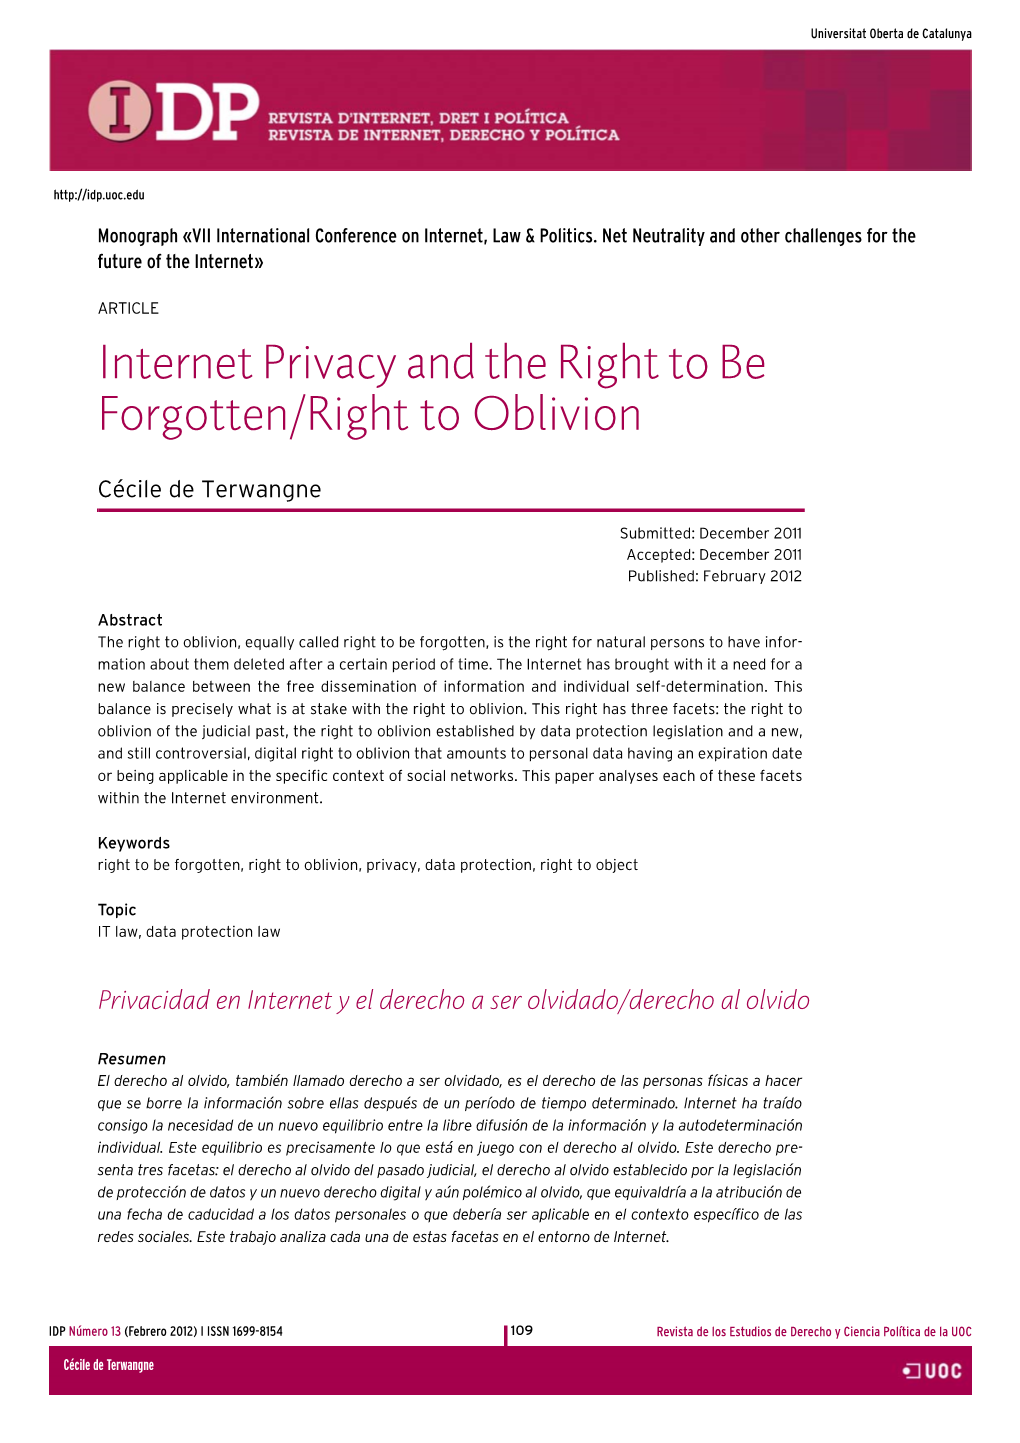 Internet Privacy and the Right to Be Forgotten/Right to Oblivion